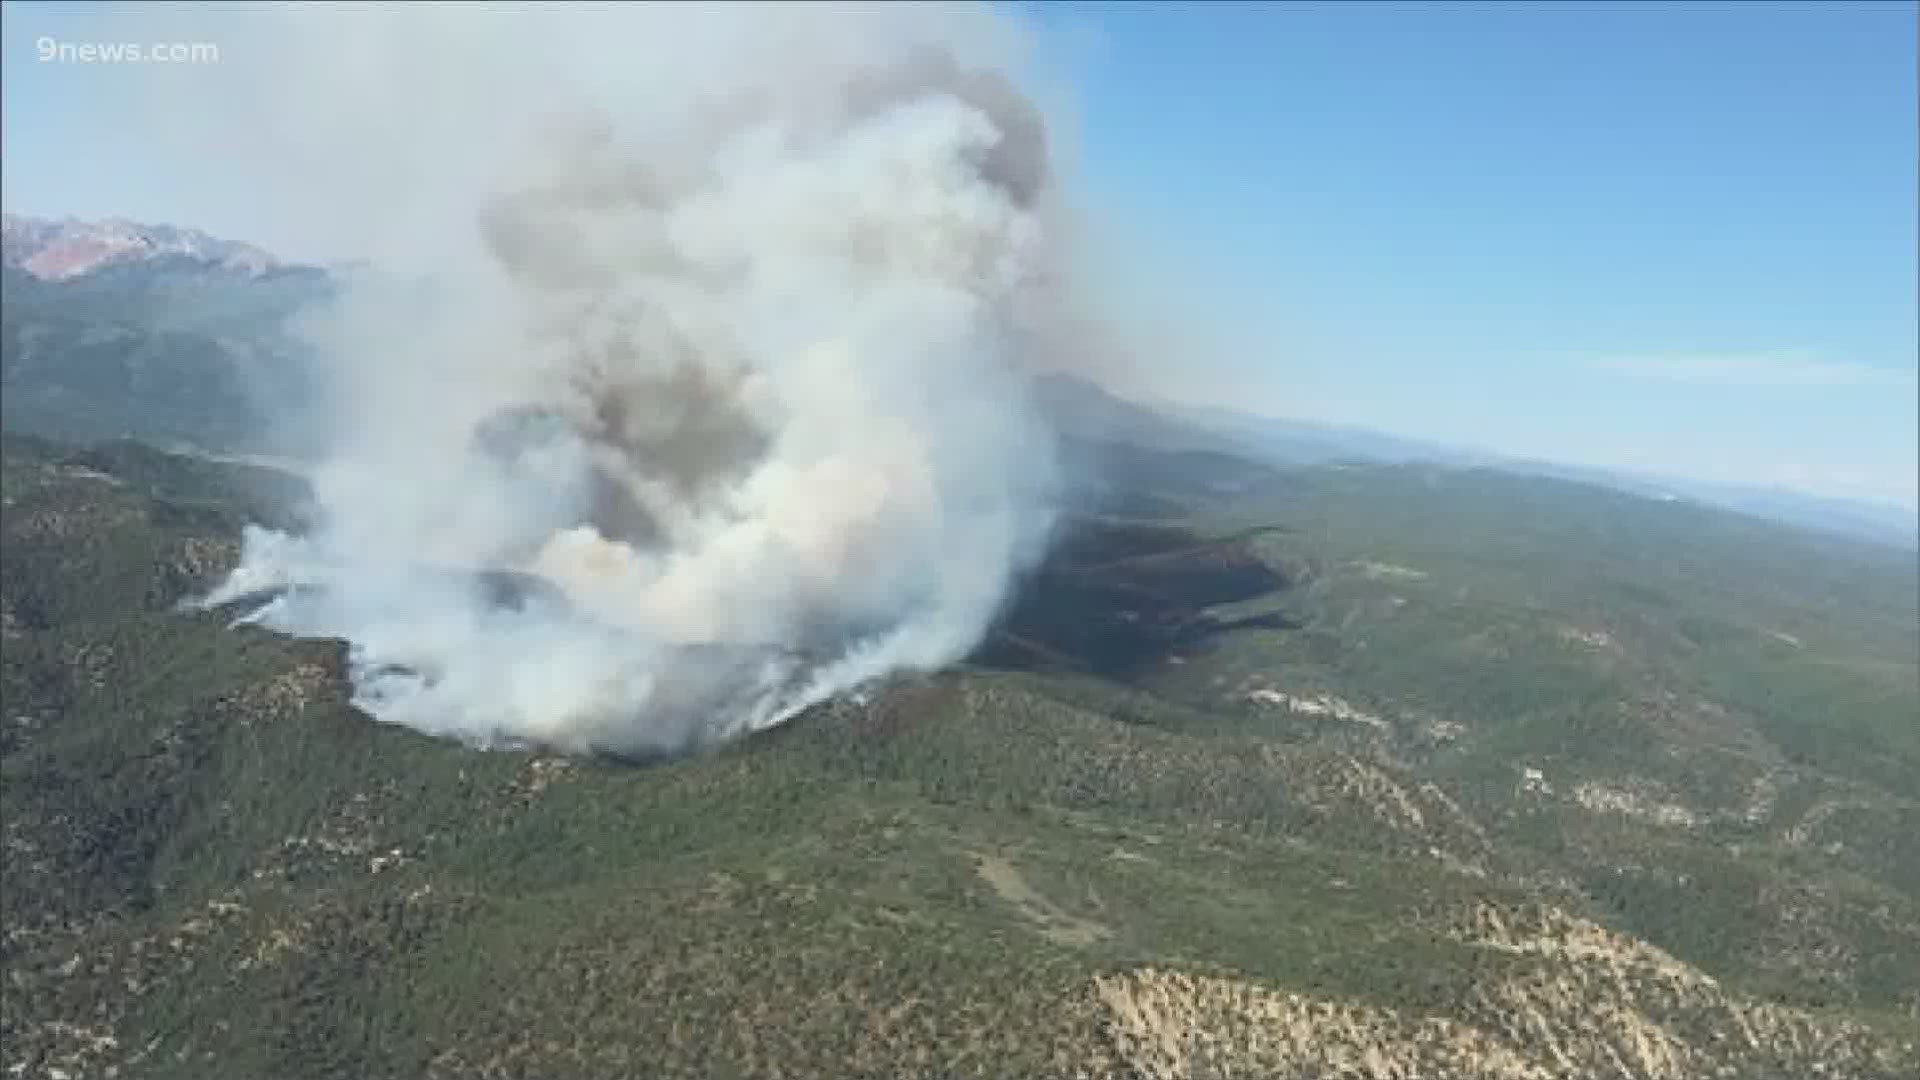 The East Canyon Fire has led to the evacuation of more than two dozen homes near Durango.